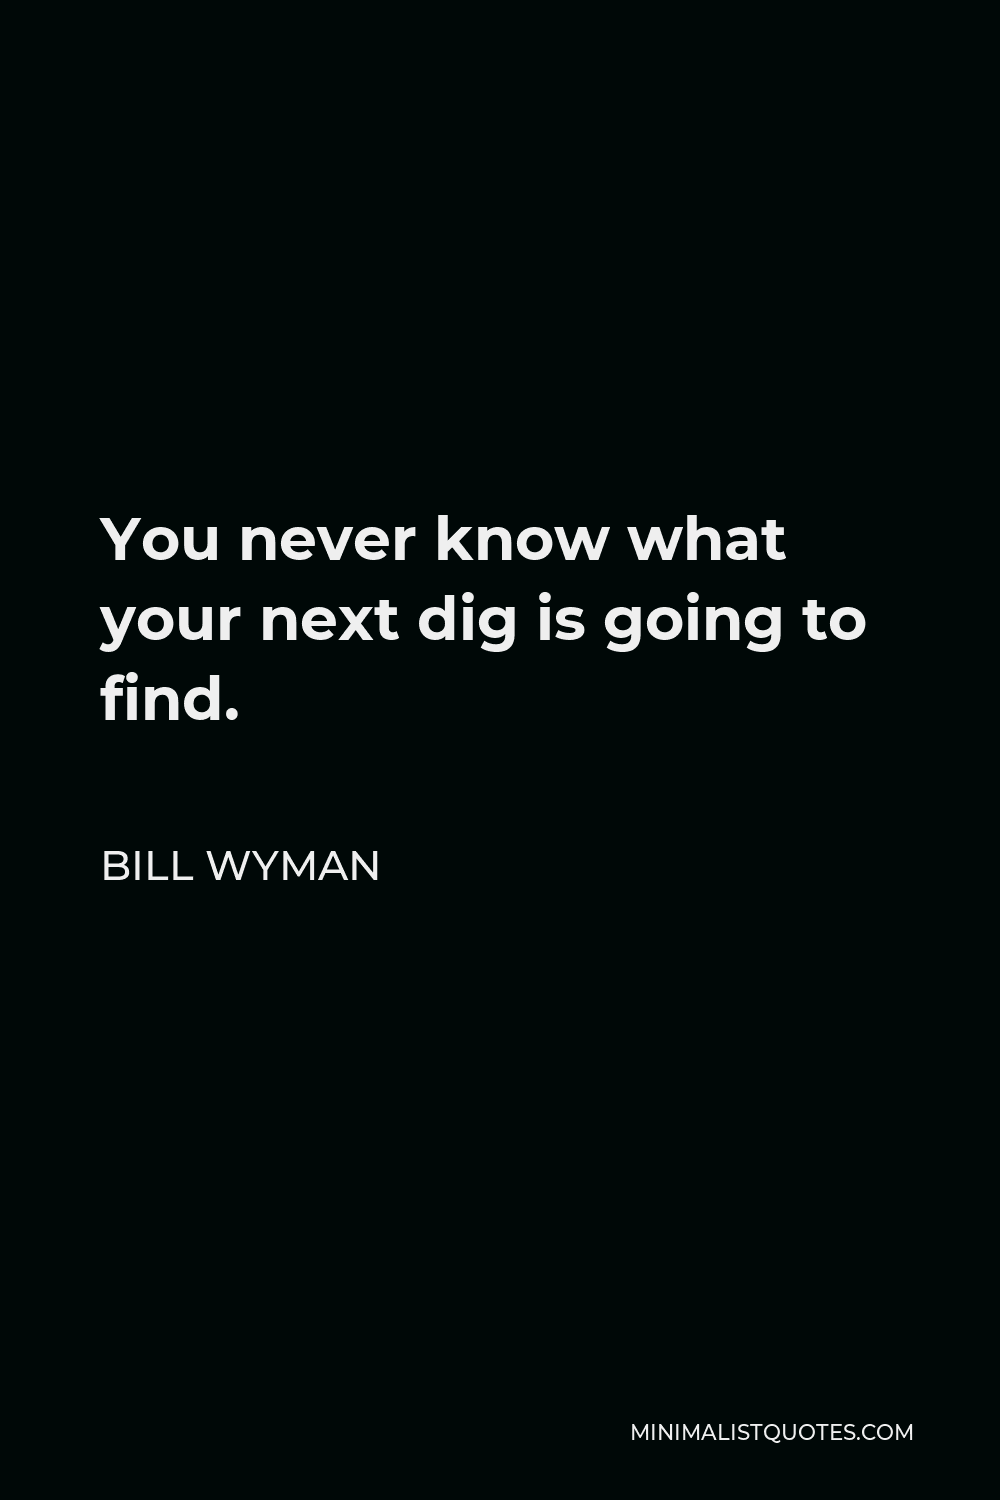 Bill Wyman Quote - You never know what your next dig is going to find.